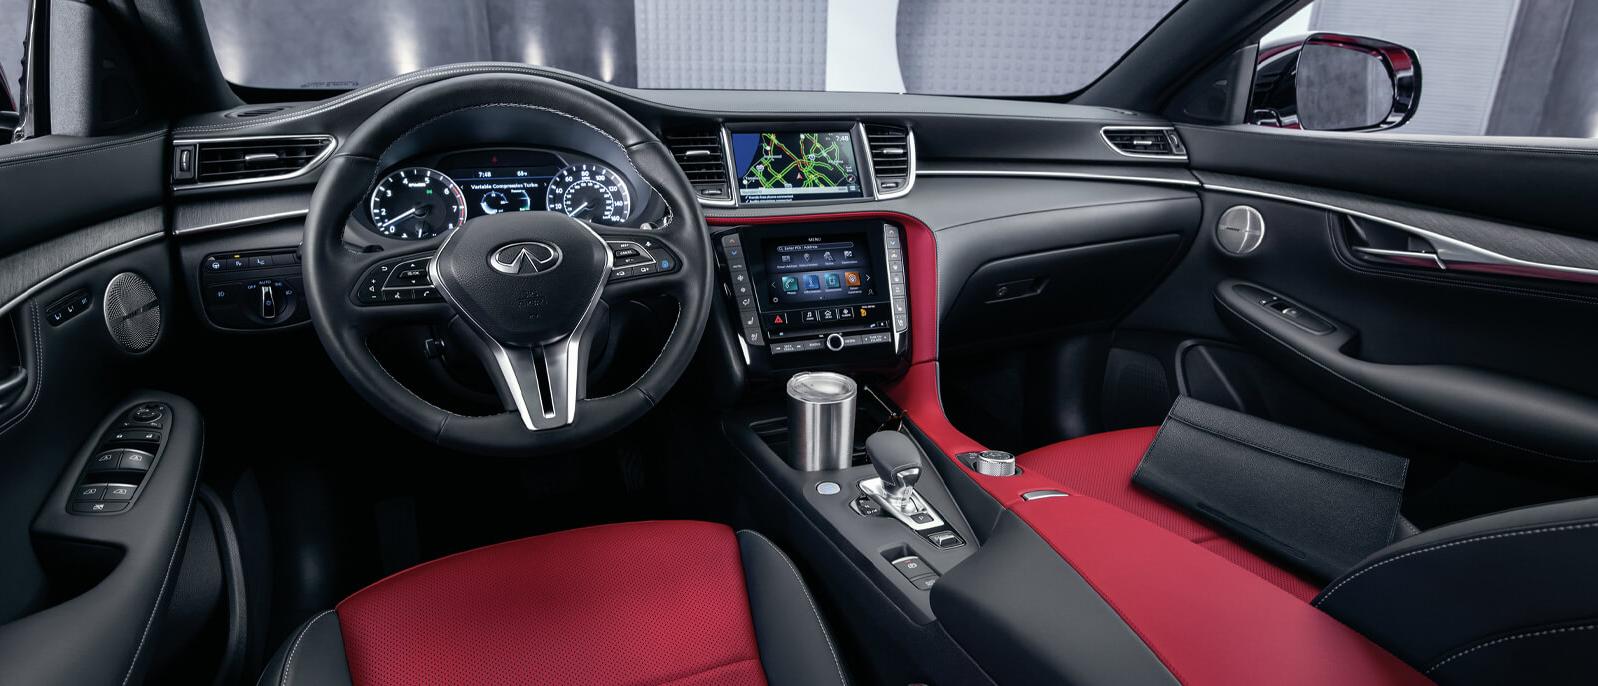 Interior view of the INFINITI QX55 featuring black upholstery with Monaco red accents.